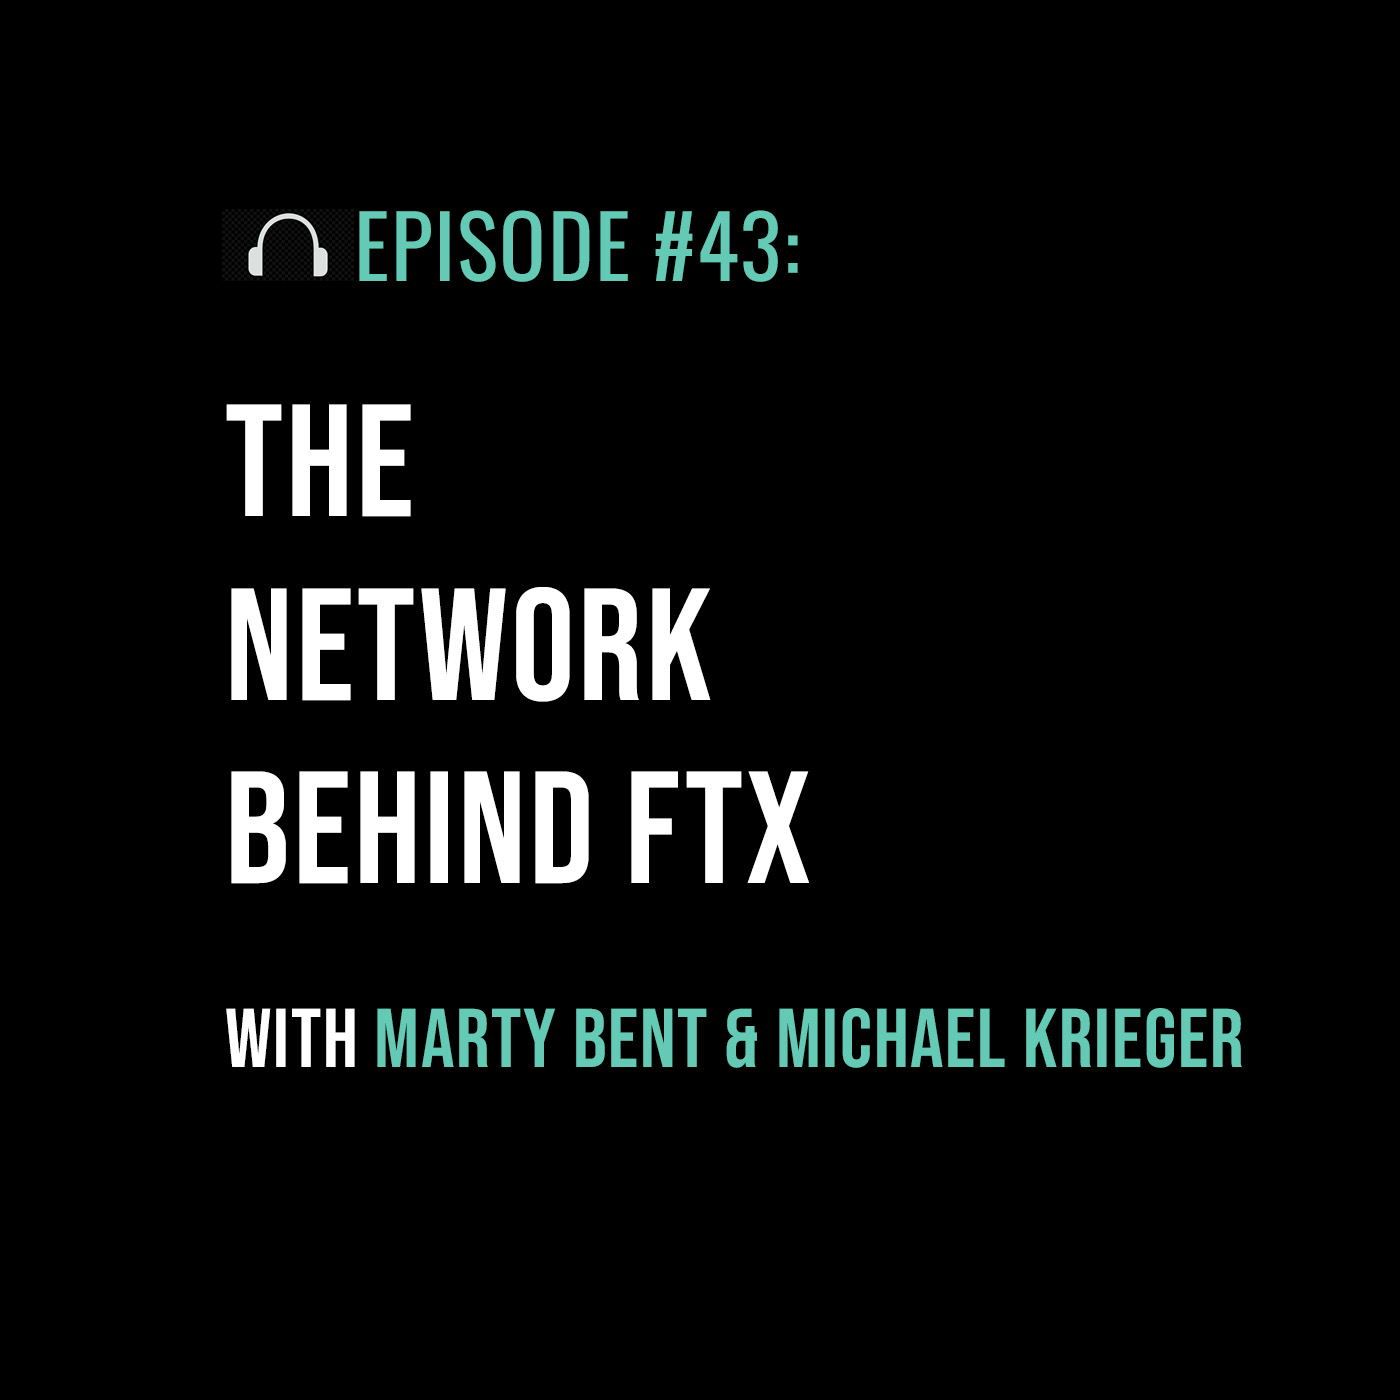 The Network Behind FTX with Marty Bent & Michael Krieger